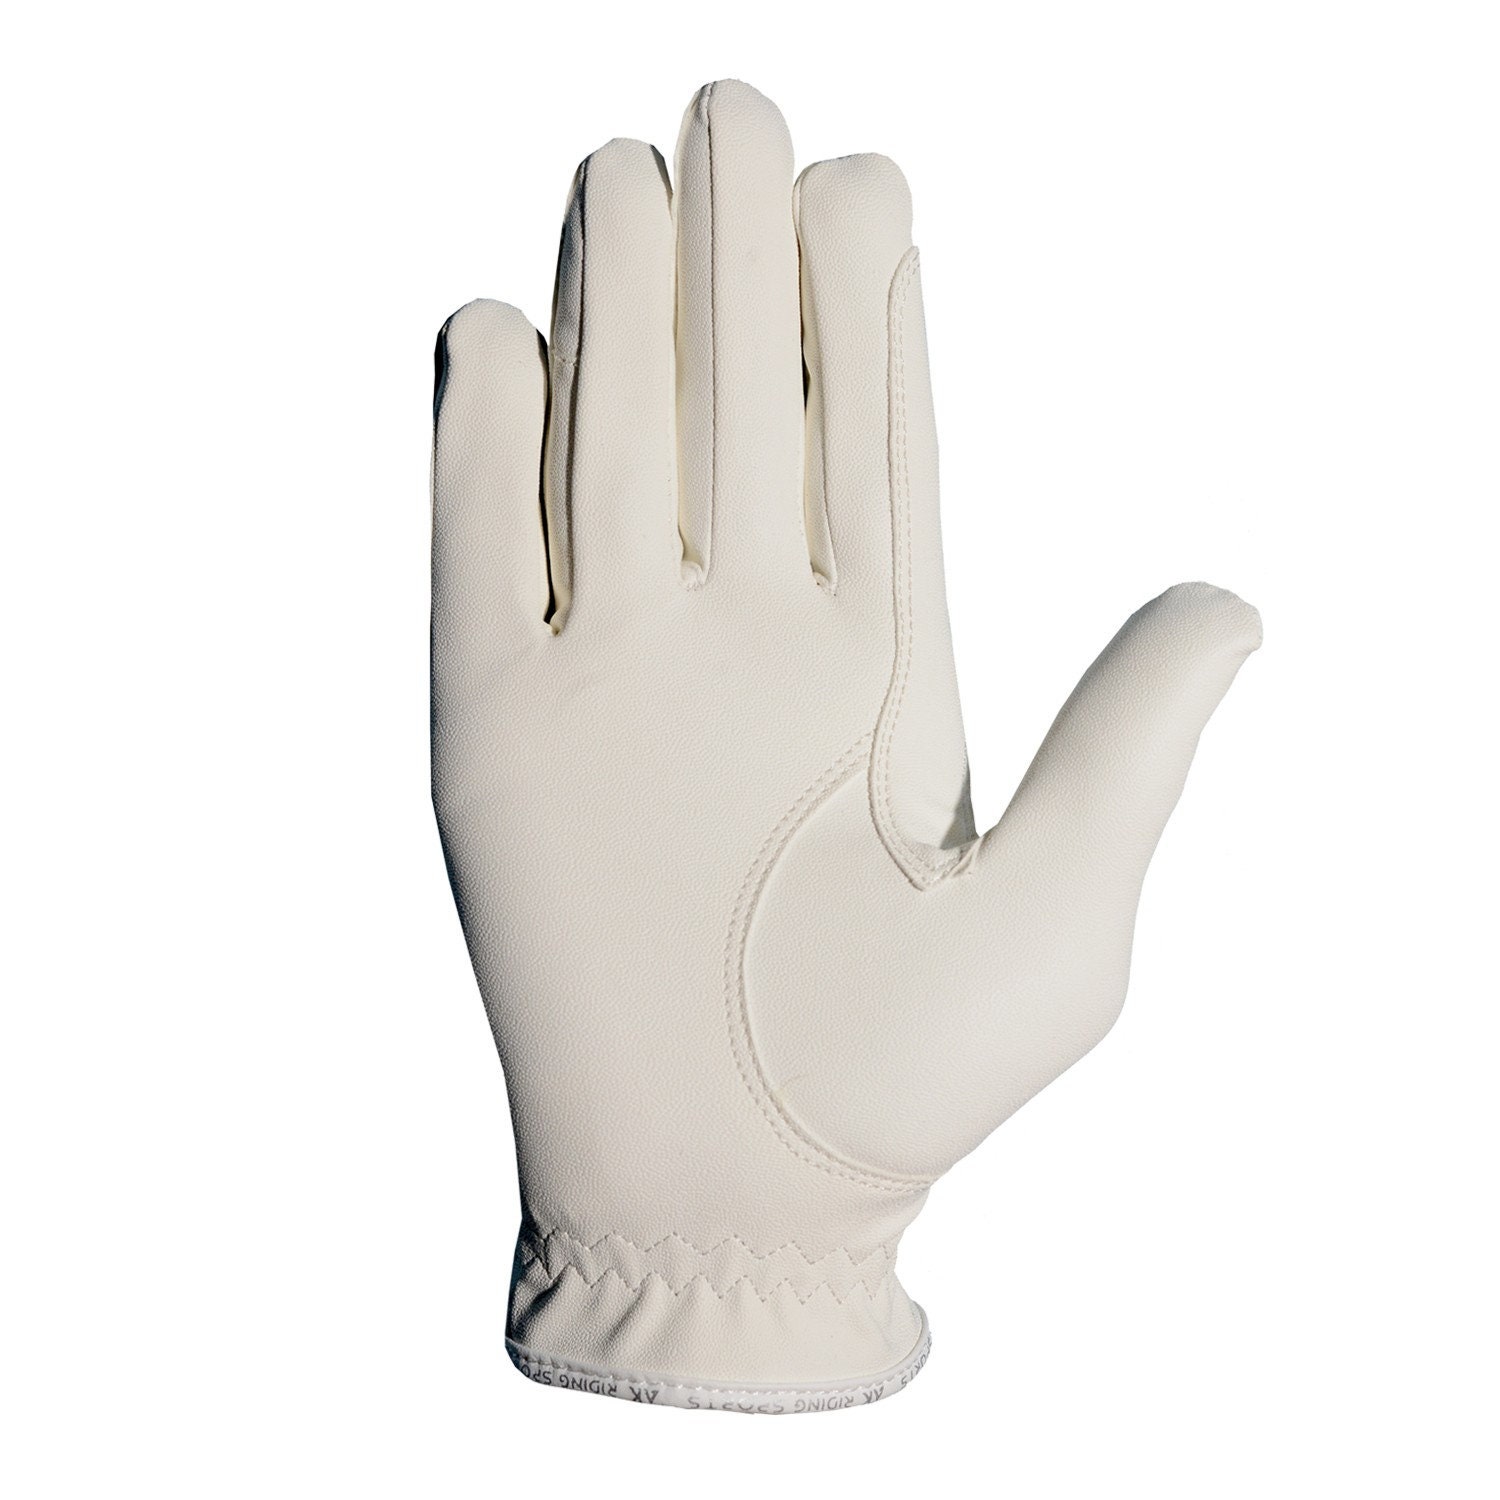 AK Synthetic Grip Horse Riding Gloves All Season Unisex Equestrian Gloves 